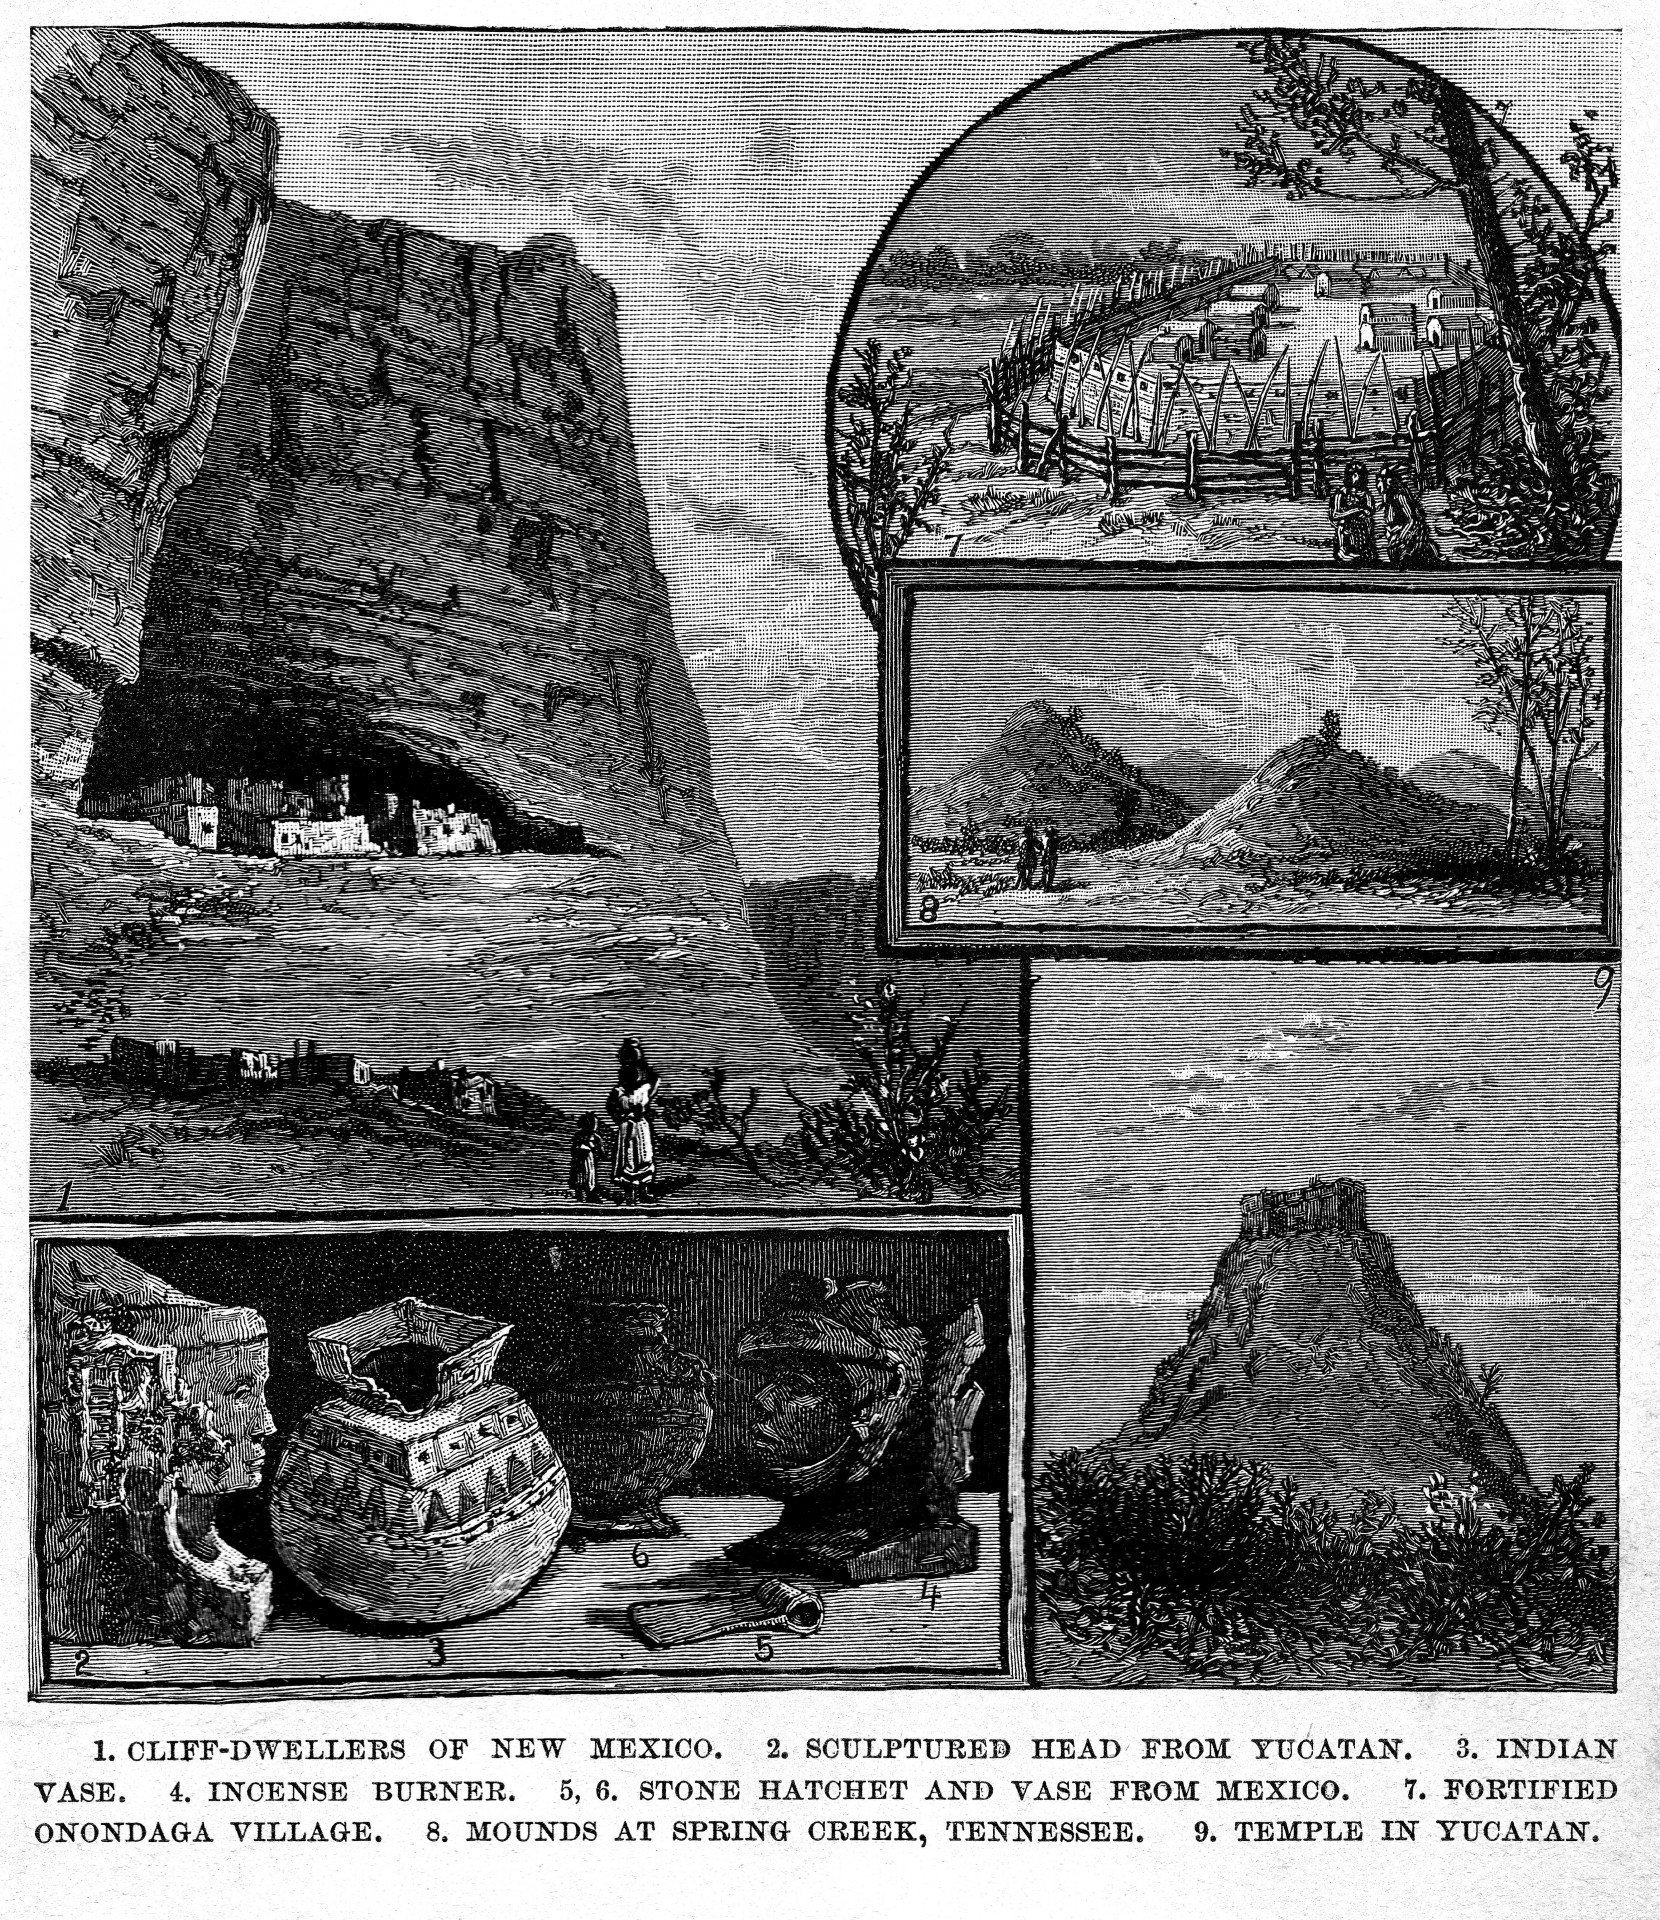 A vintage illustration showing Native American artifacts, dwellings, and territories.